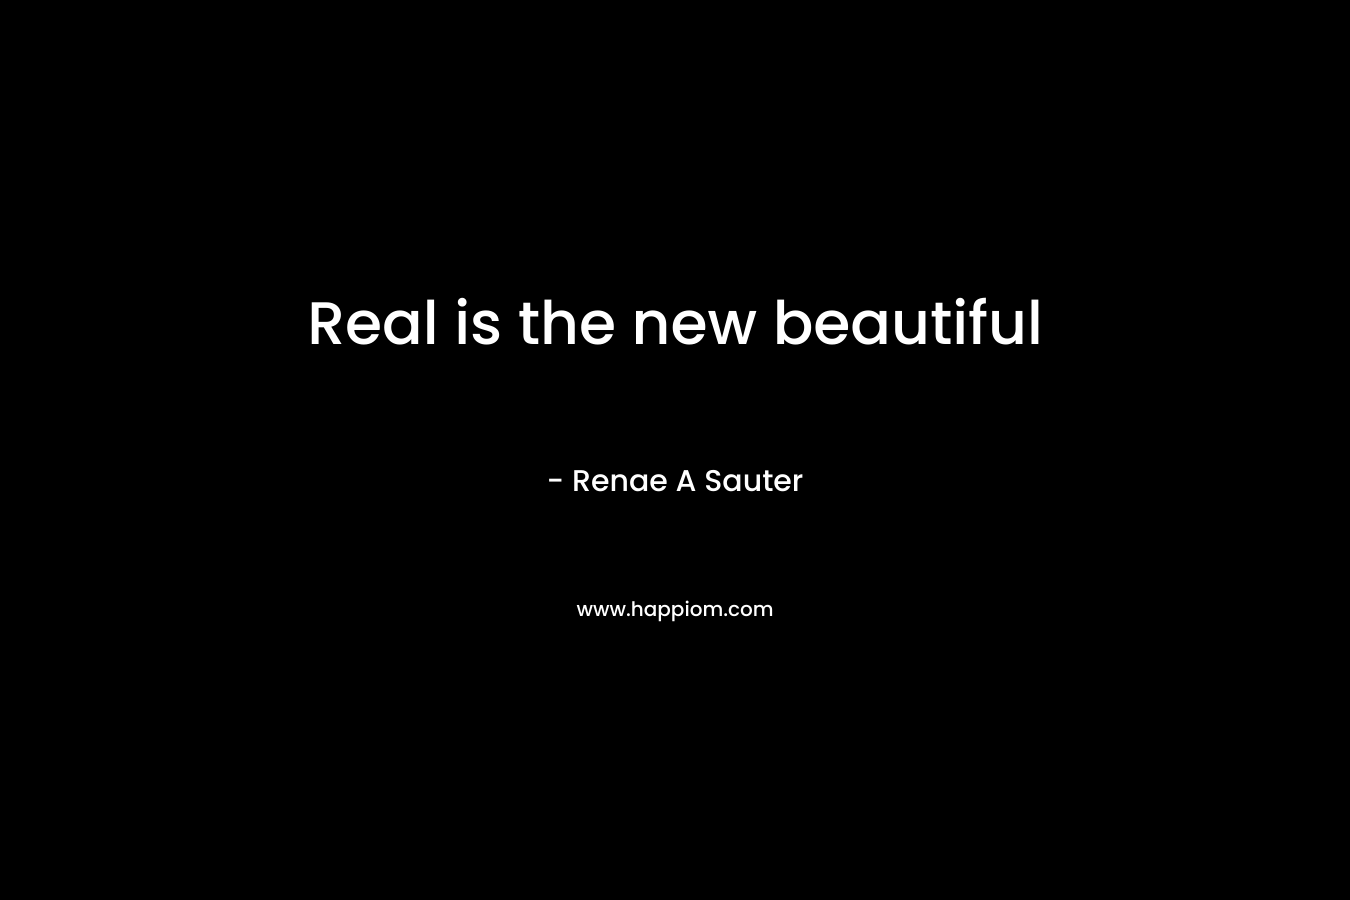 Real is the new beautiful